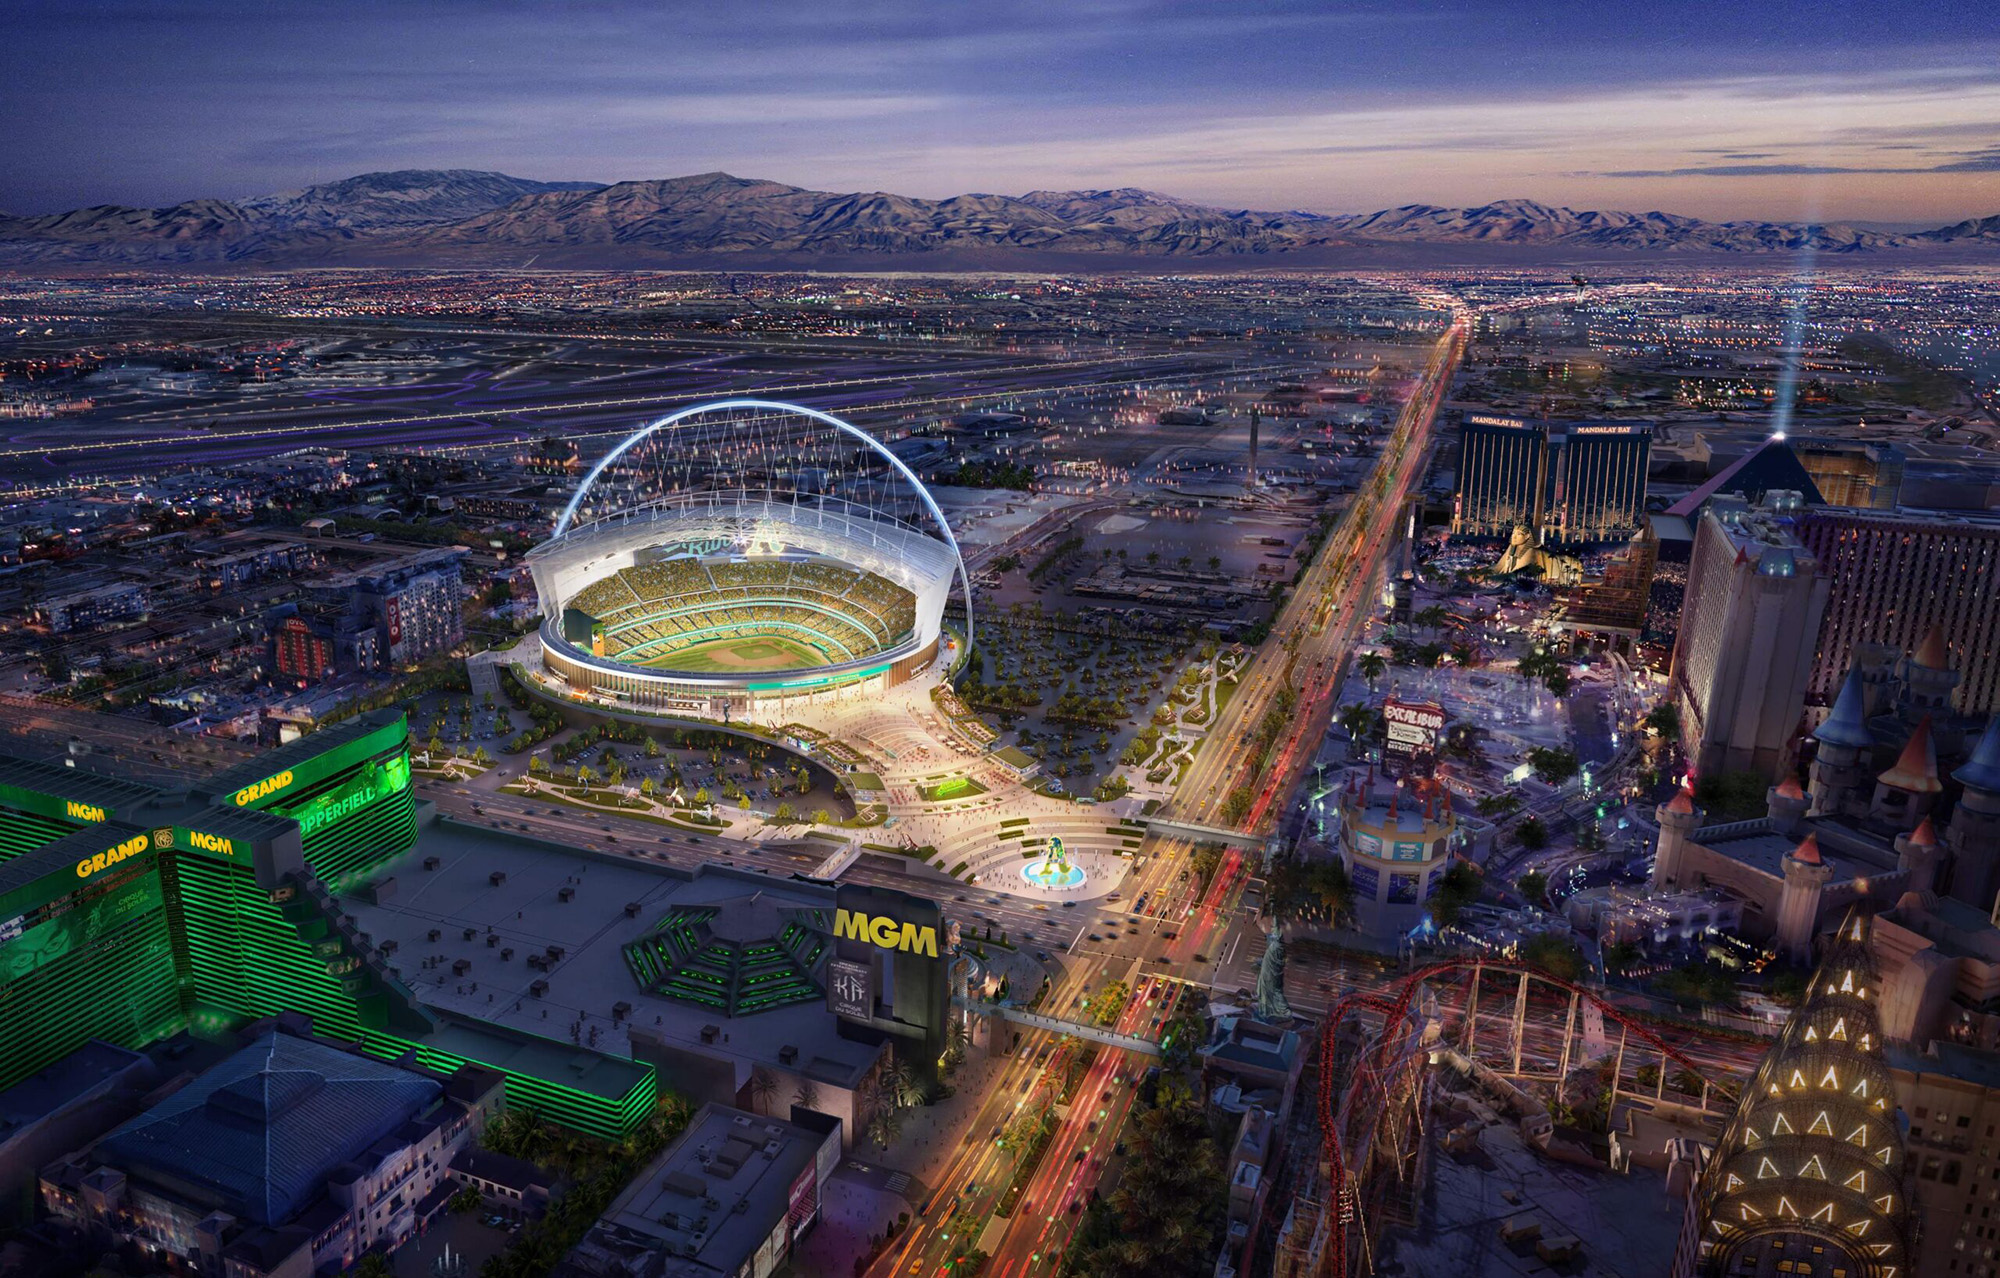 Now comes the hard part in Athletics ballpark planning Ballpark Digest